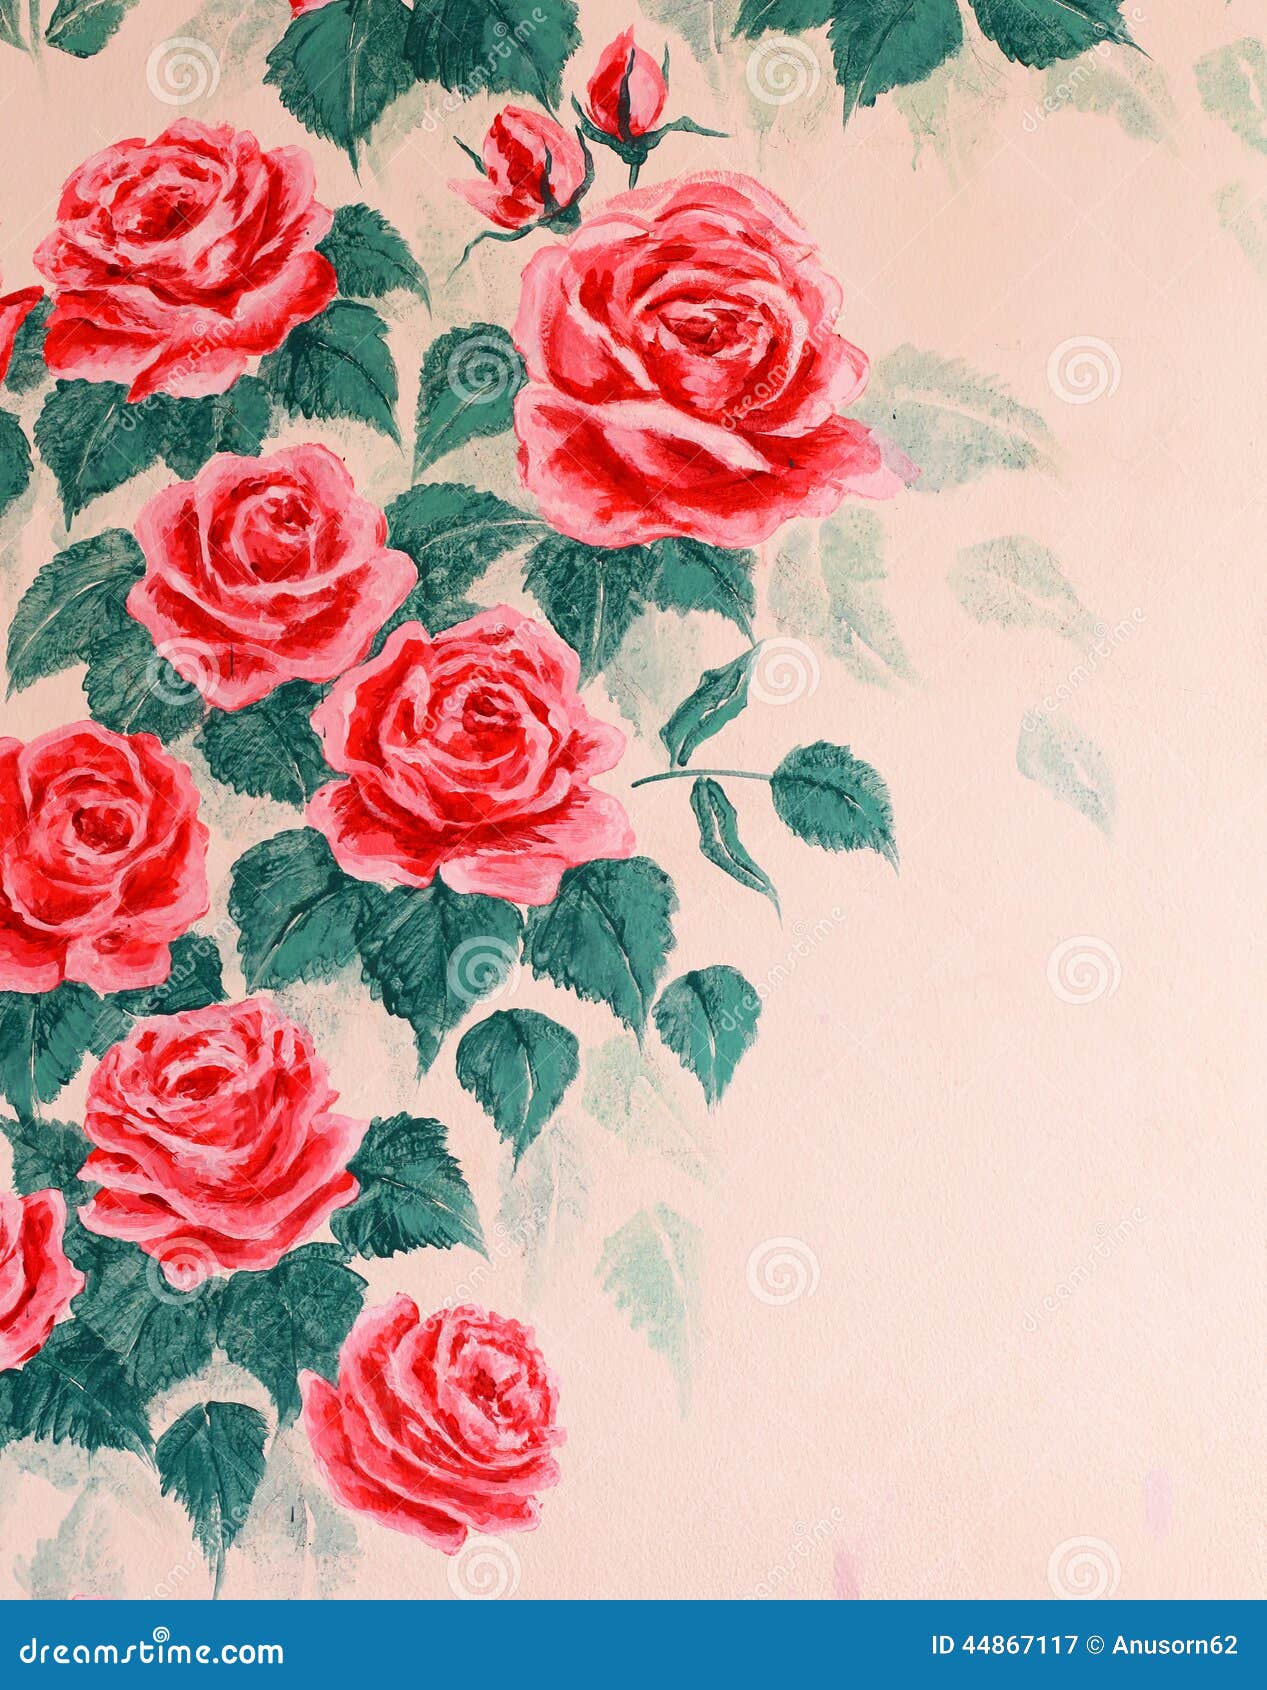 Wall with painting rose stock image. Image of leaf, holiday - 44867117